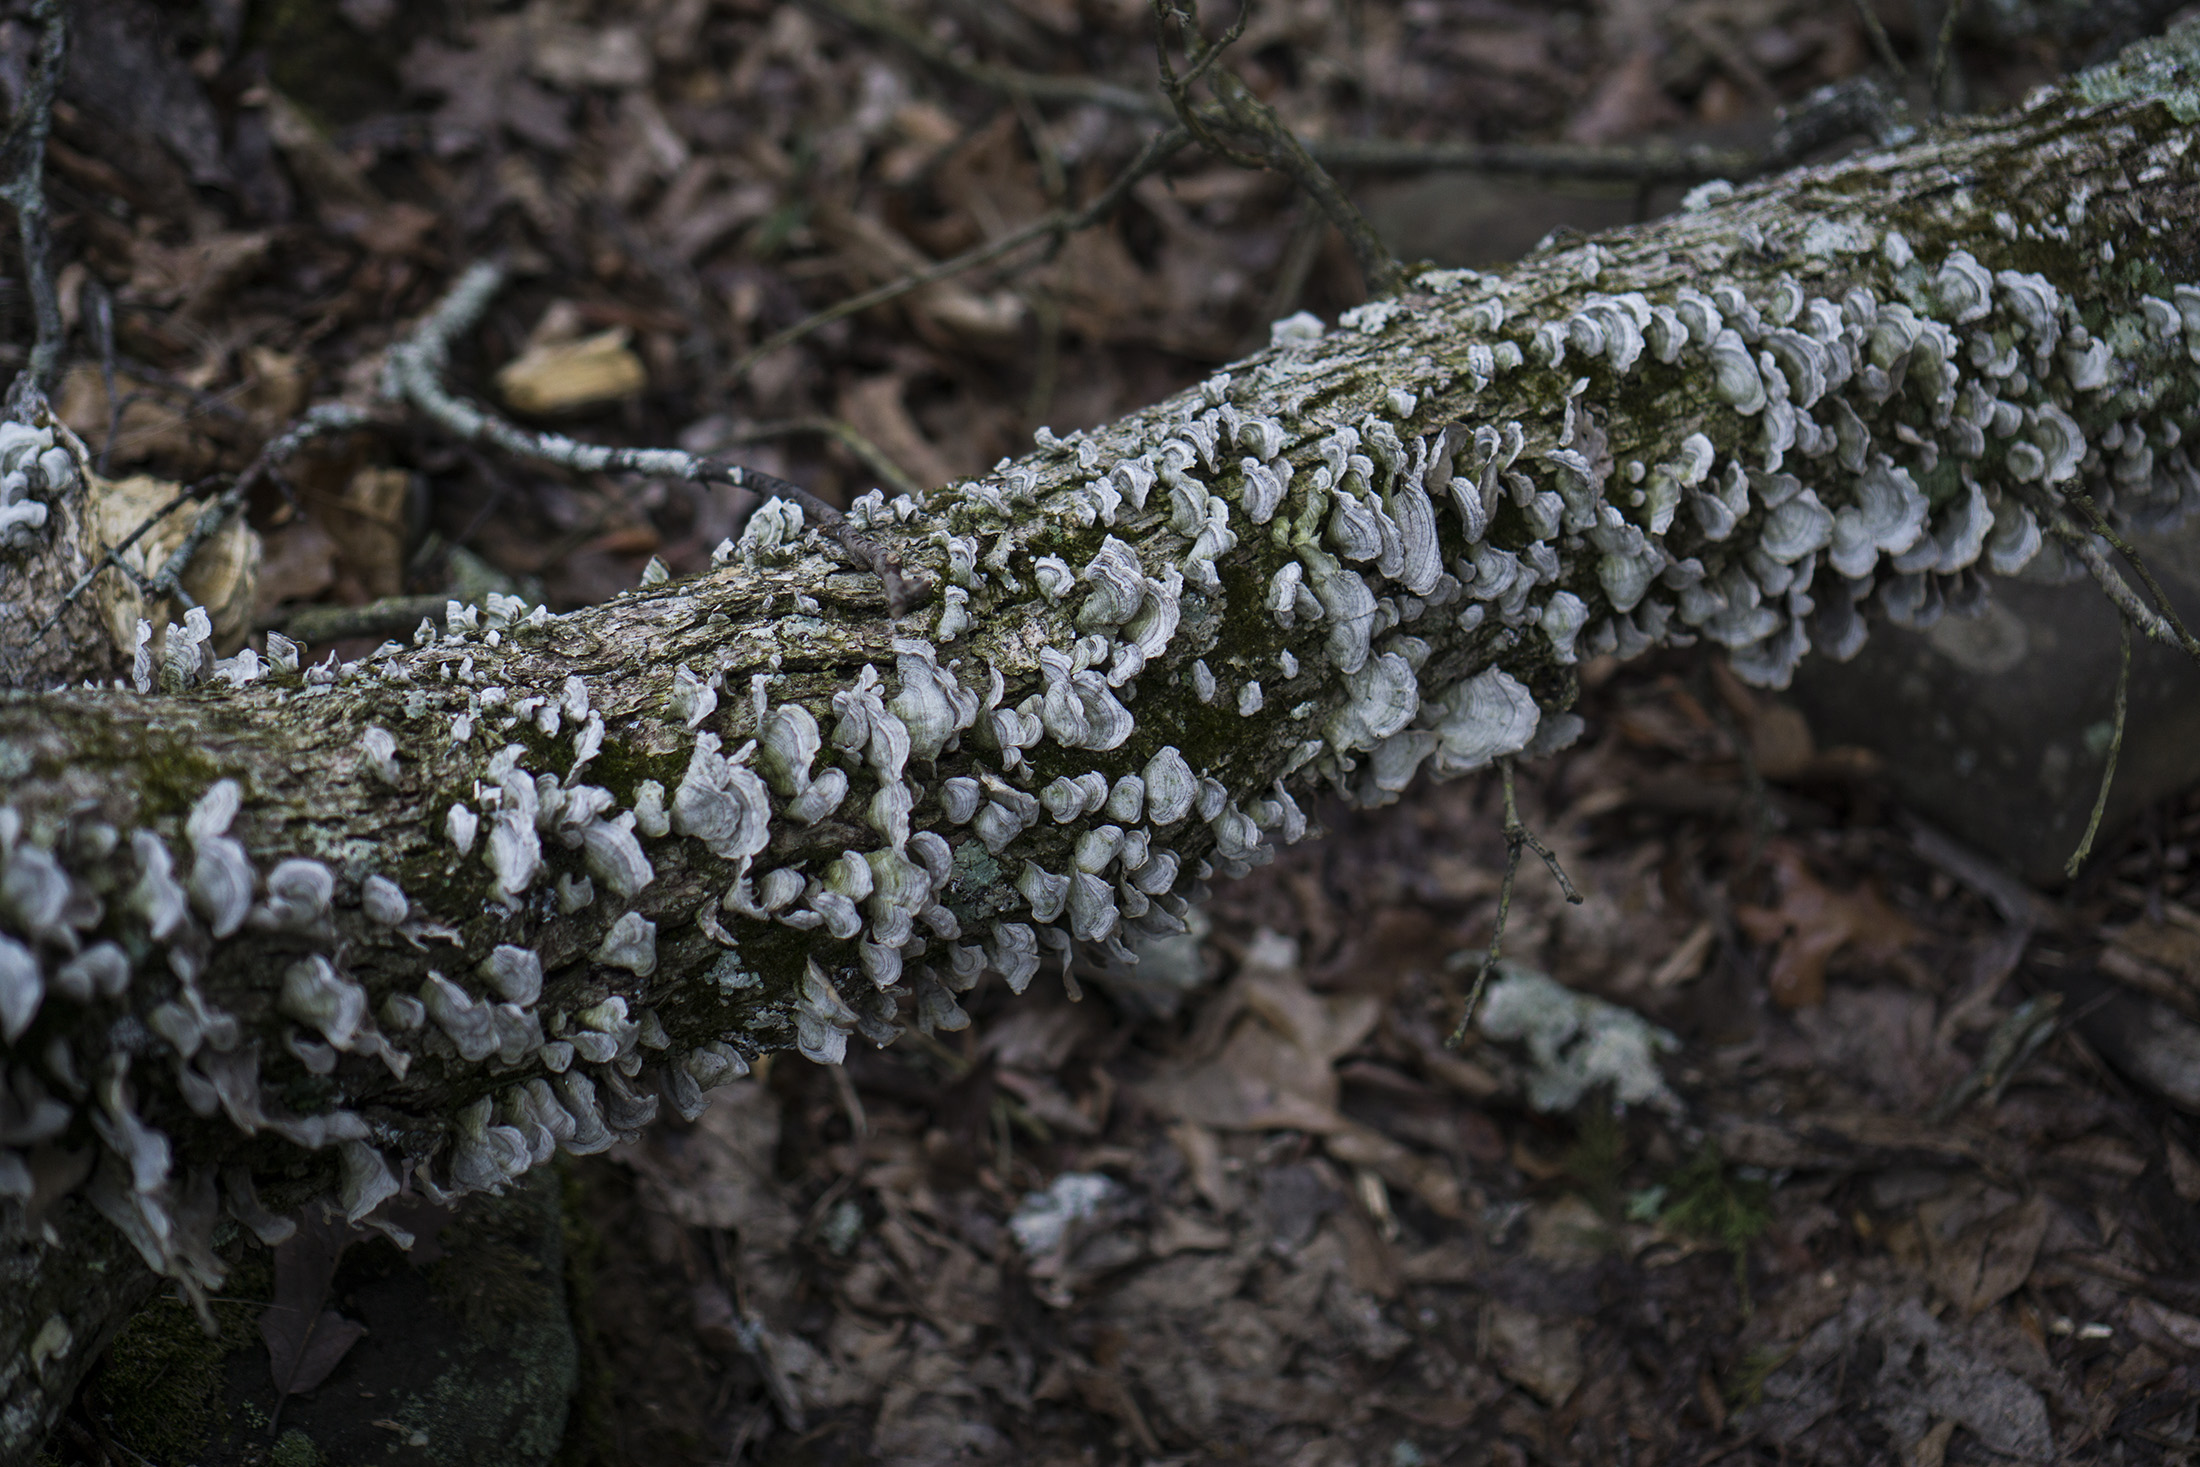 Fungus growing on downed tree trunk, Garden of the Gods, Shawnee National Forest, IL / Darker than Green